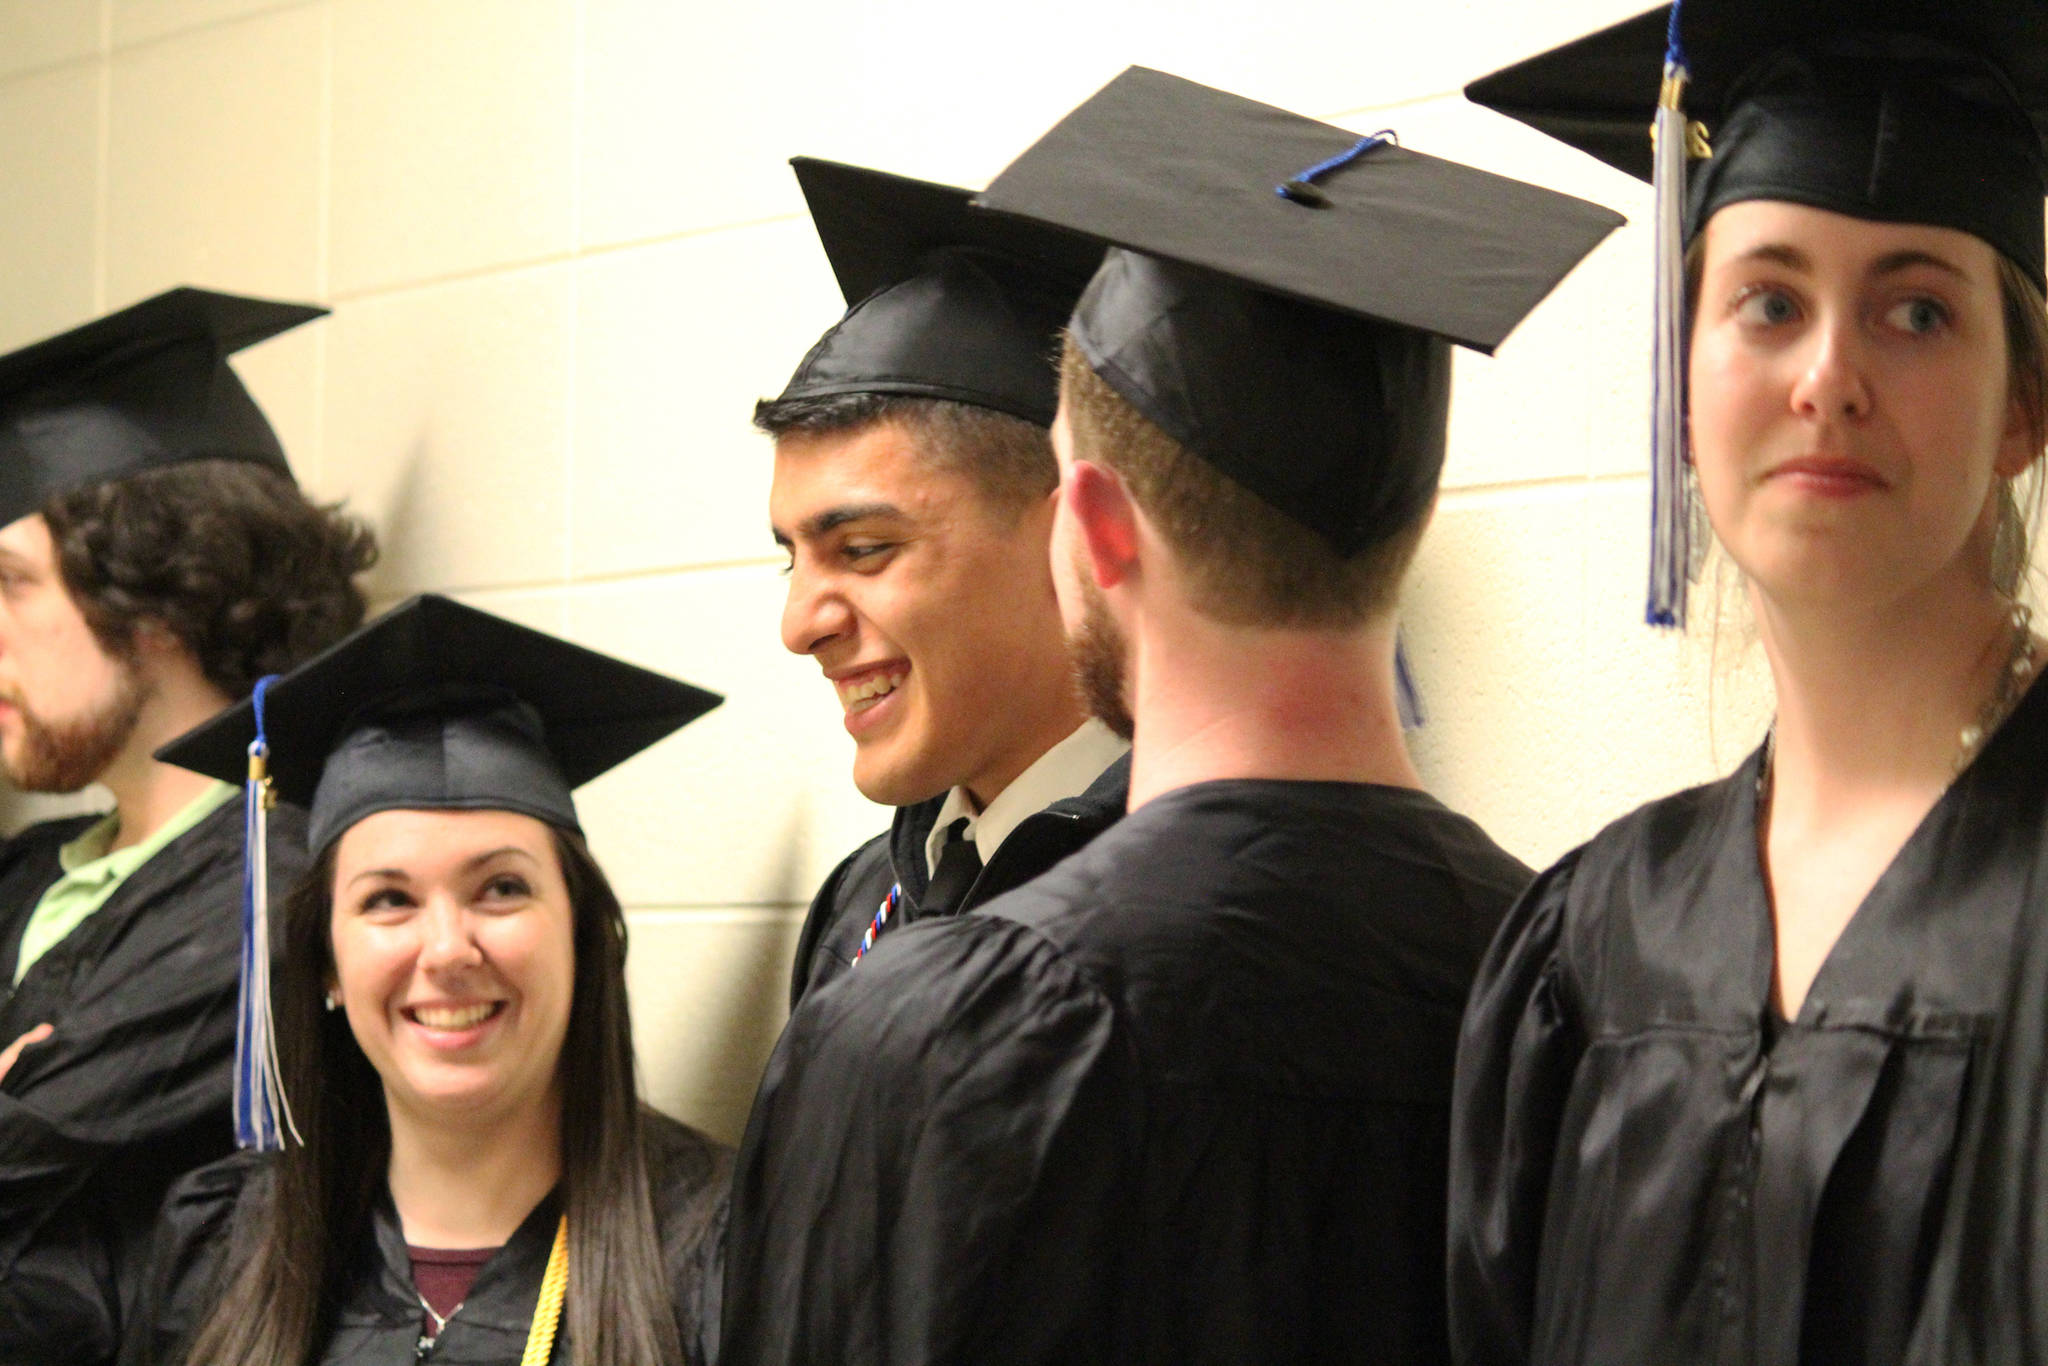 Kachemak Bay Campus graduate Pedro Ochoa Jr. (center) laughs with classmates before their commencement ceremony Wednesday, May 9, 2018 at Homer High School in Homer, Alaska. (Photo by Megan Pacer/Homer News)